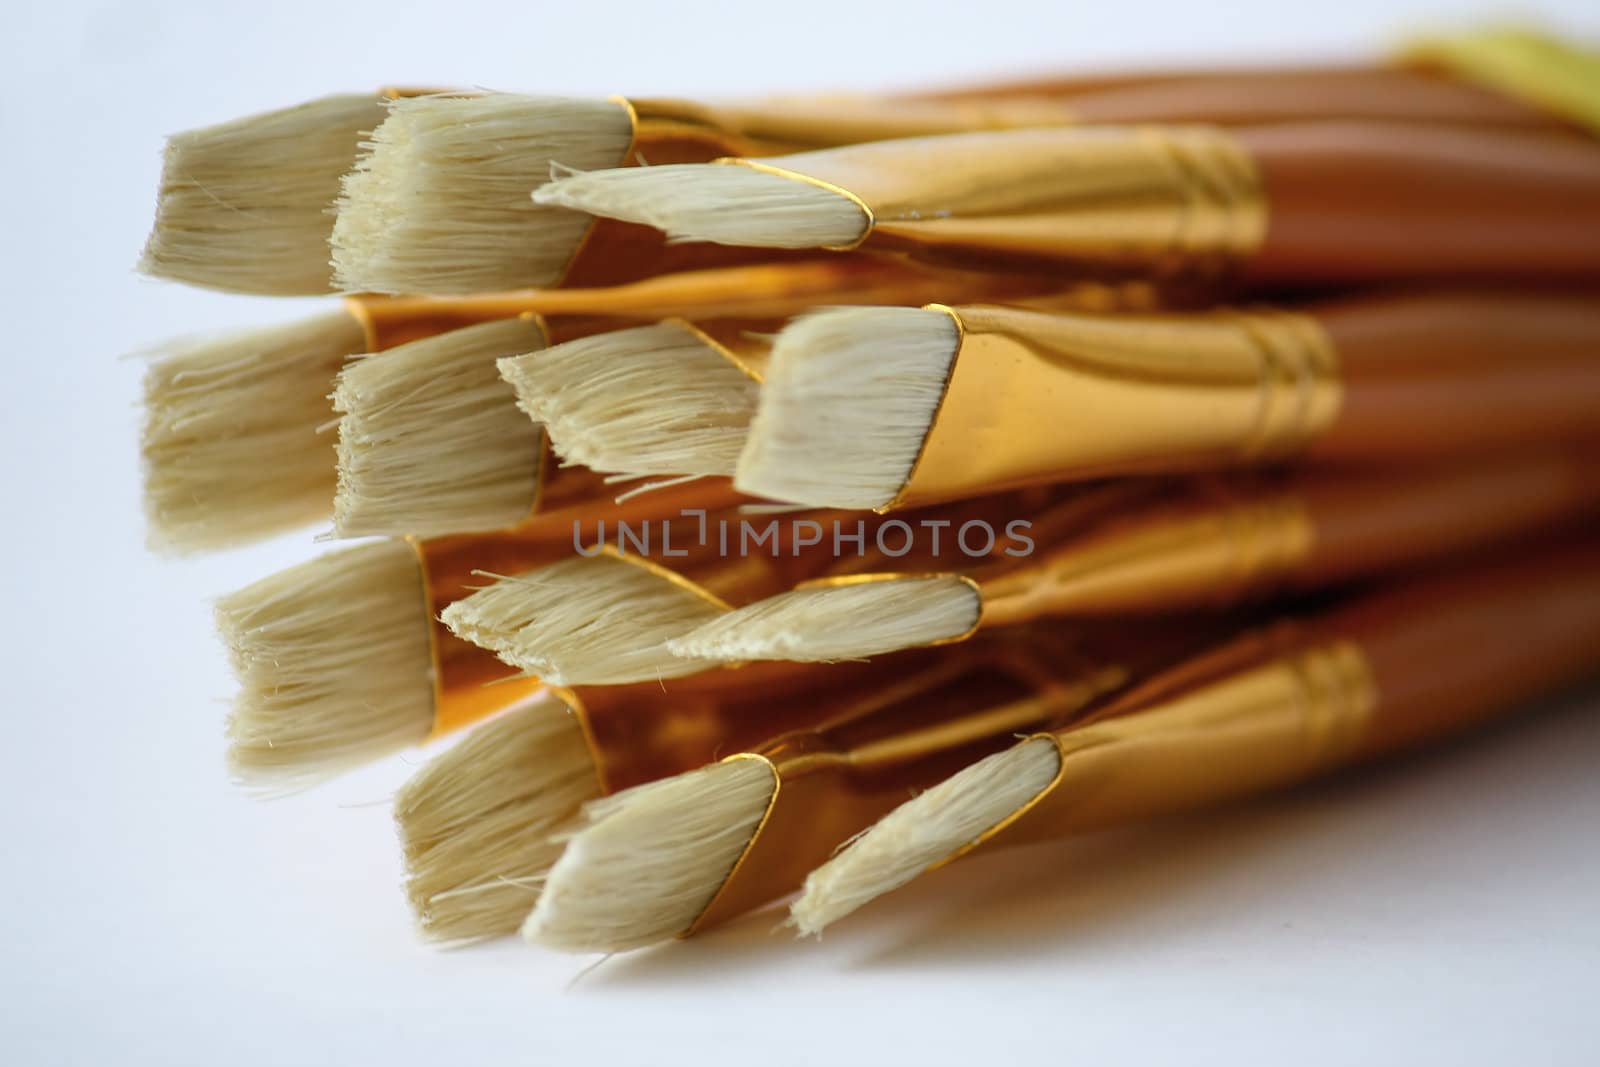 It is many brushes. They are necessary for drawing by paints.